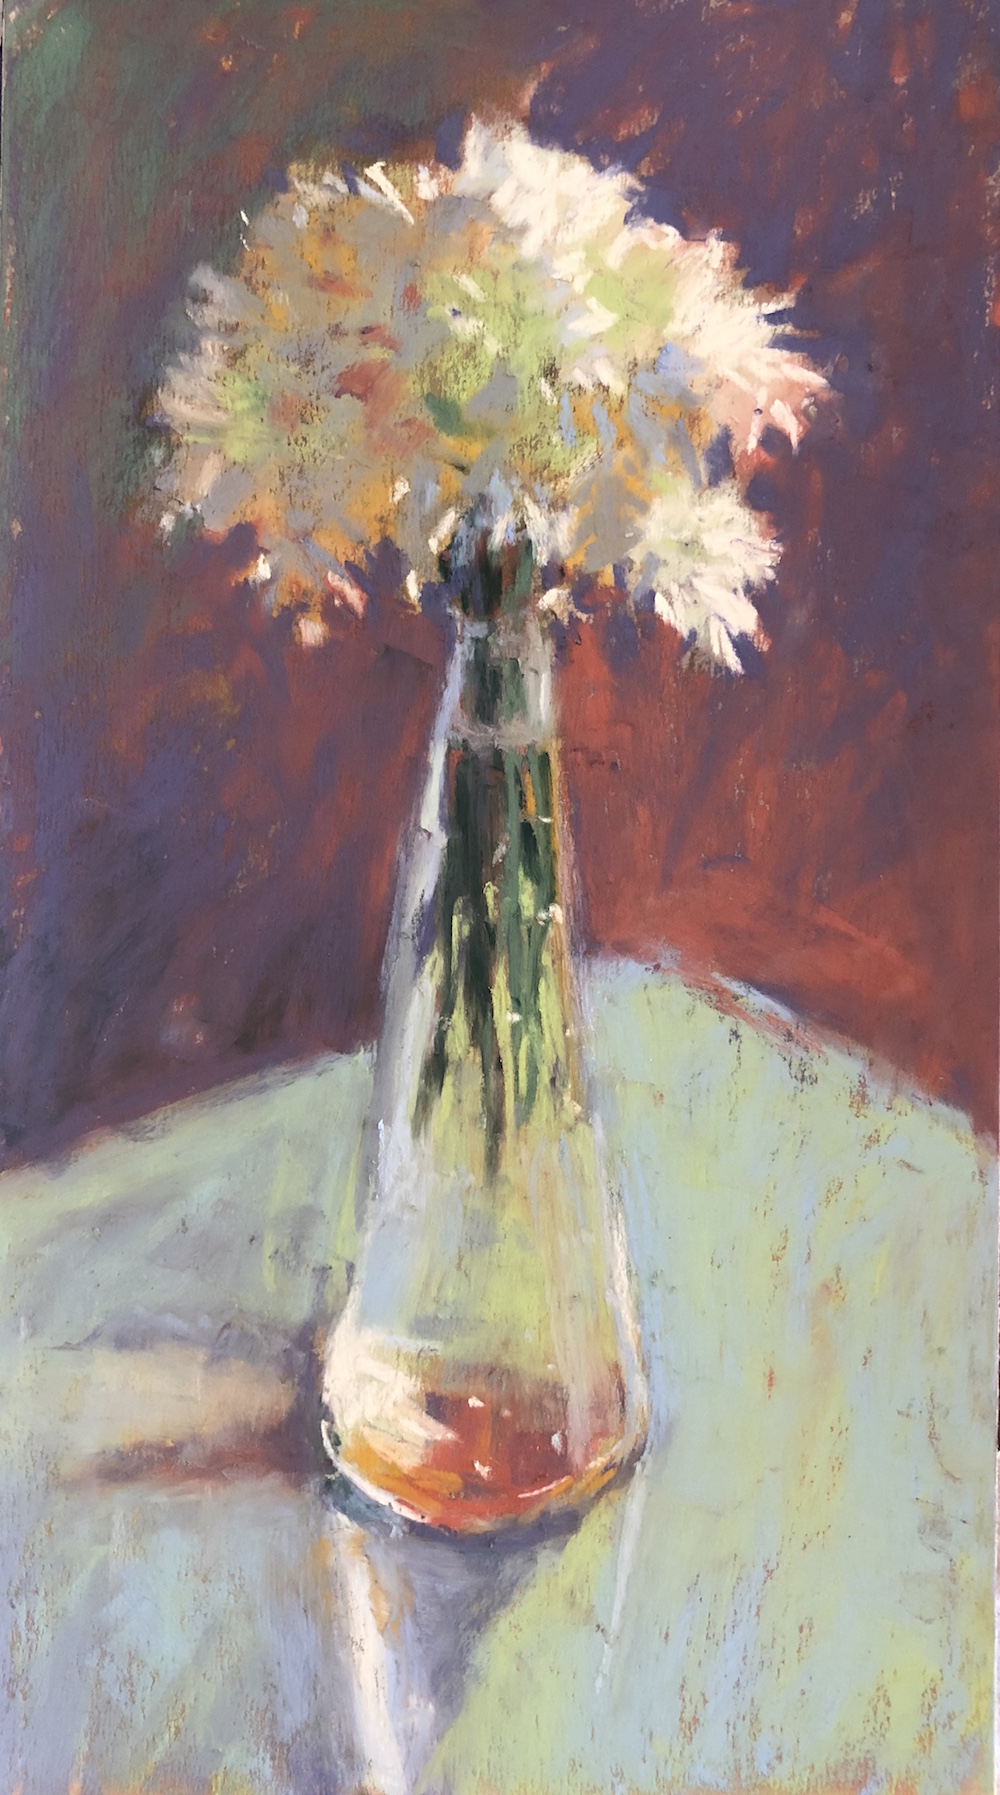 Benefits to Exploring a Single Subject: Gail Sibley, "Flowers in Neutral," Unison Colour pastels on recycled UART 600 paper, 11 1/4 x 6 in. Available.